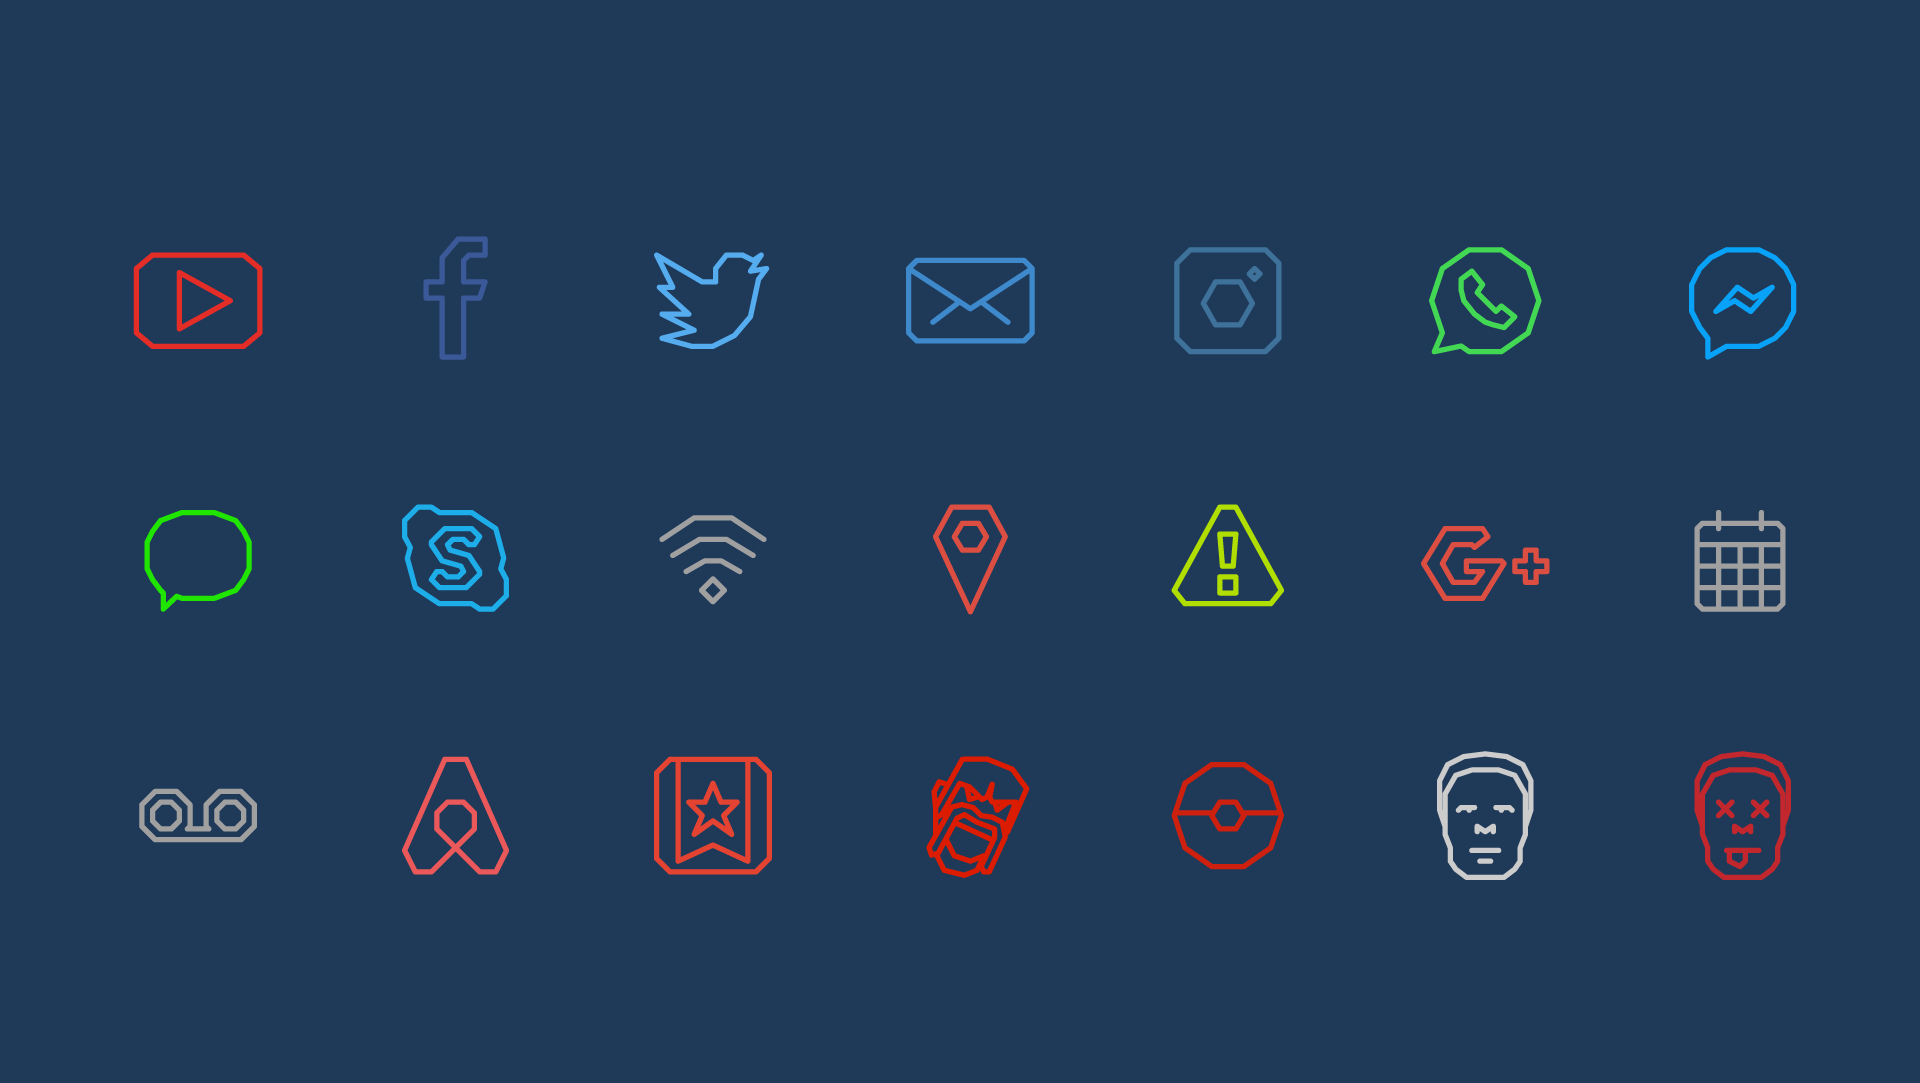 Free edgy icon set with several social media icons